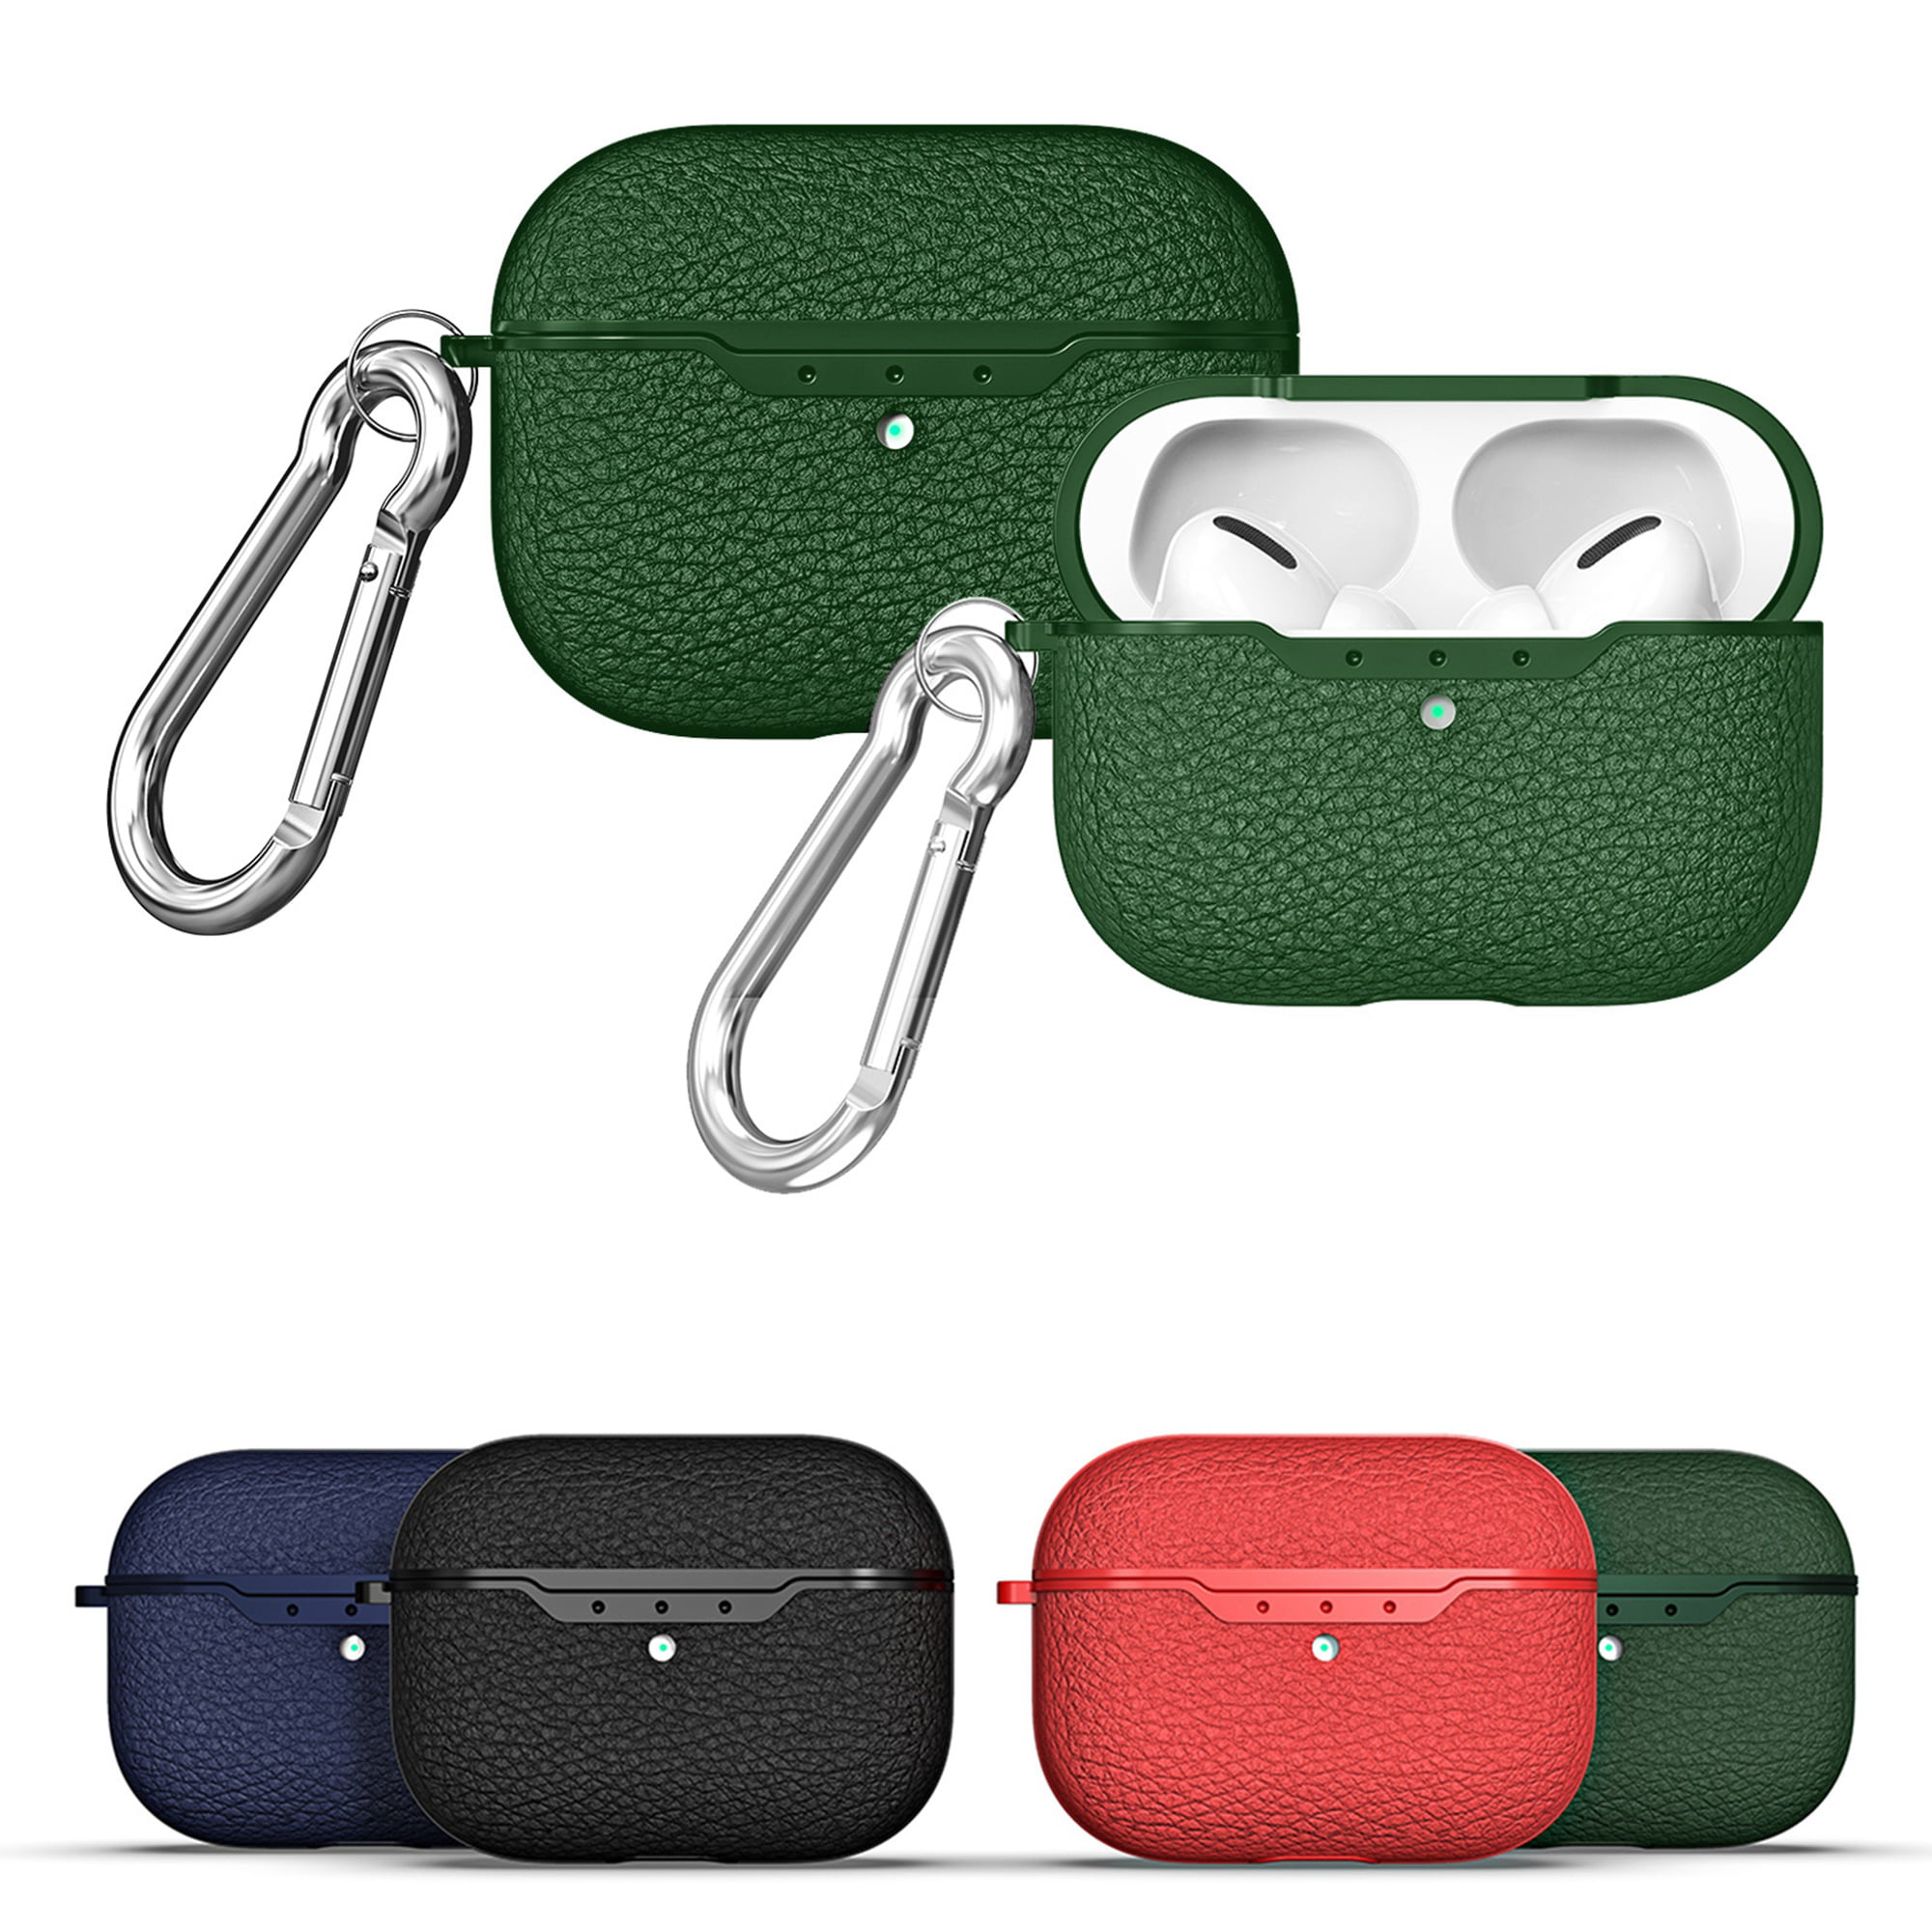 Fintie Case for AirPods Pro 2019, Silver Plating Soft TPU Cover with Hand Strap Full Body Shockproof Protective Skin for AirPods Pro Charging Case Supports Wireless Charging